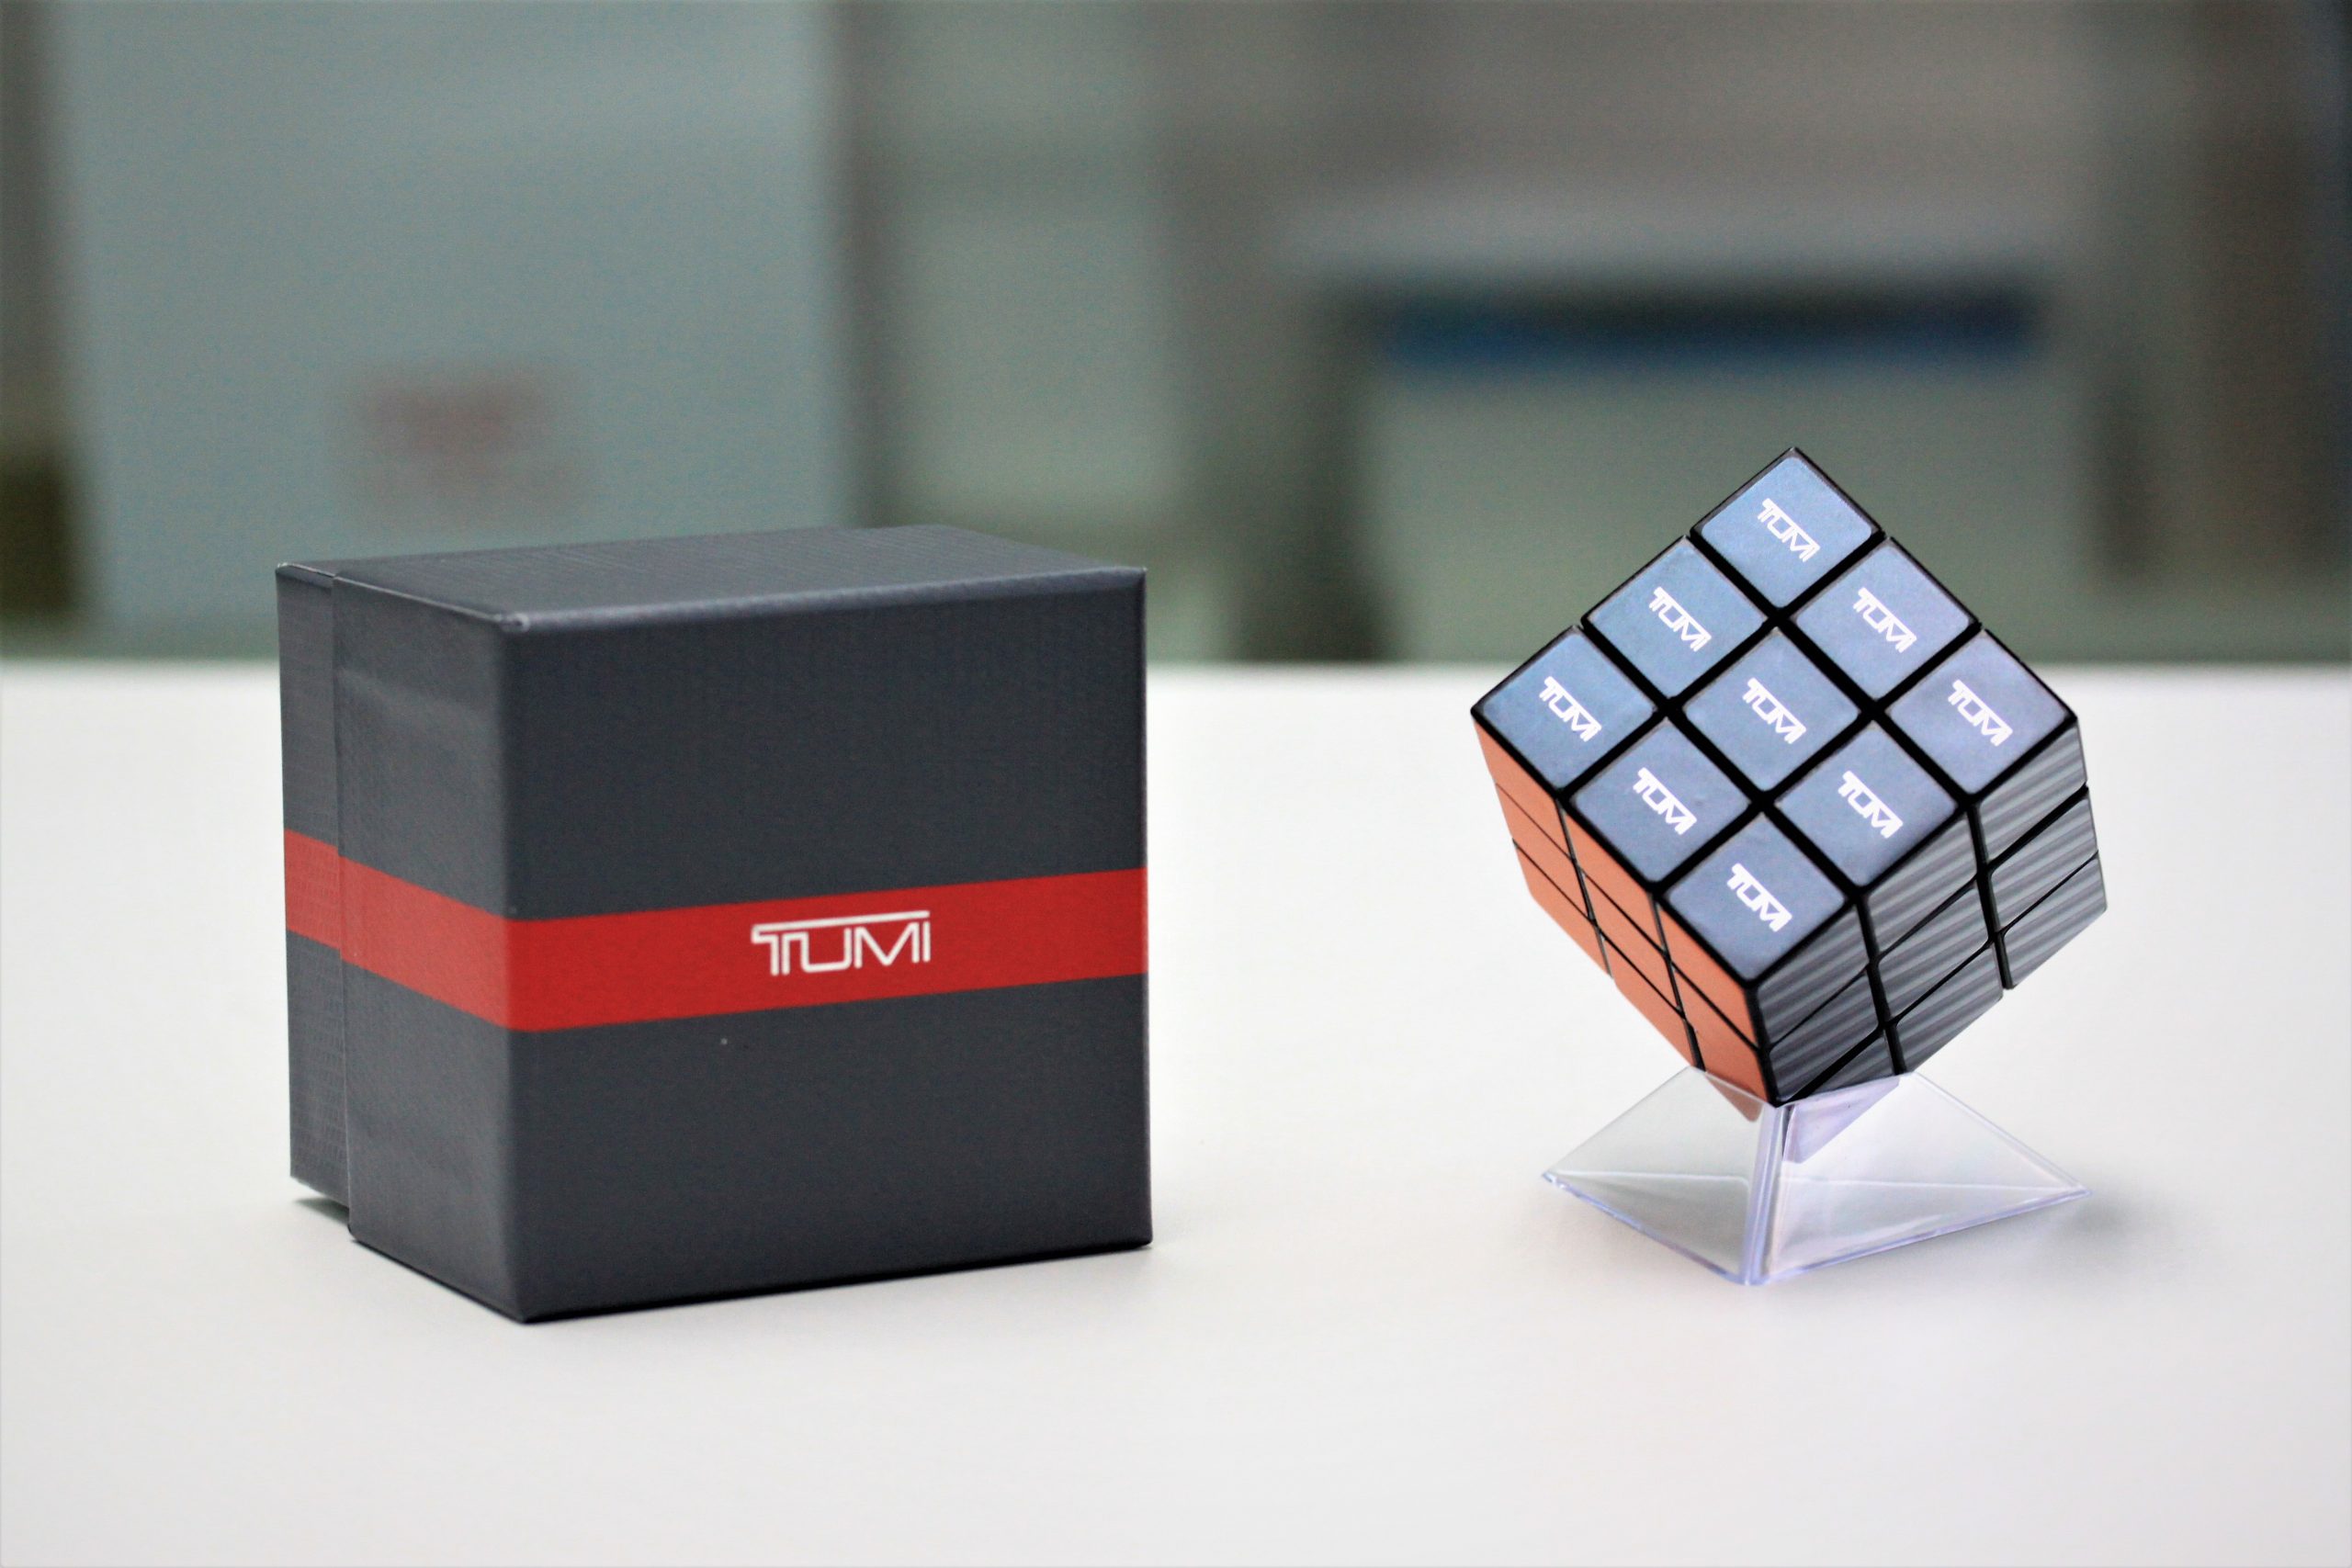 Rubik's Cube: A question, waiting to be answered